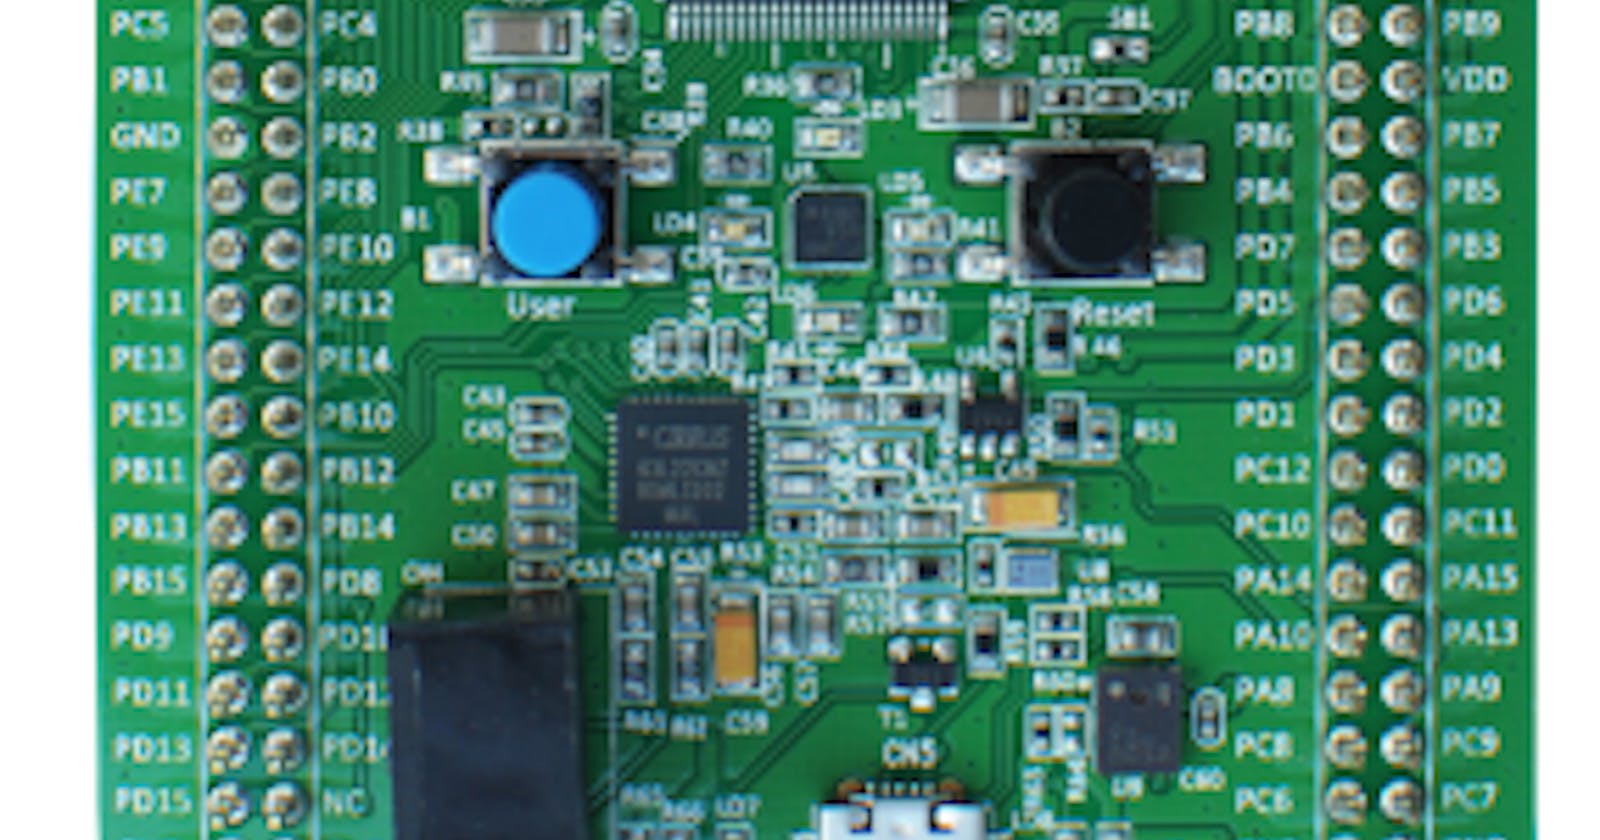 Interfacing an Ultrasonic Sensor with the STM32F407 Discovery Board using Bare-Metal Programming